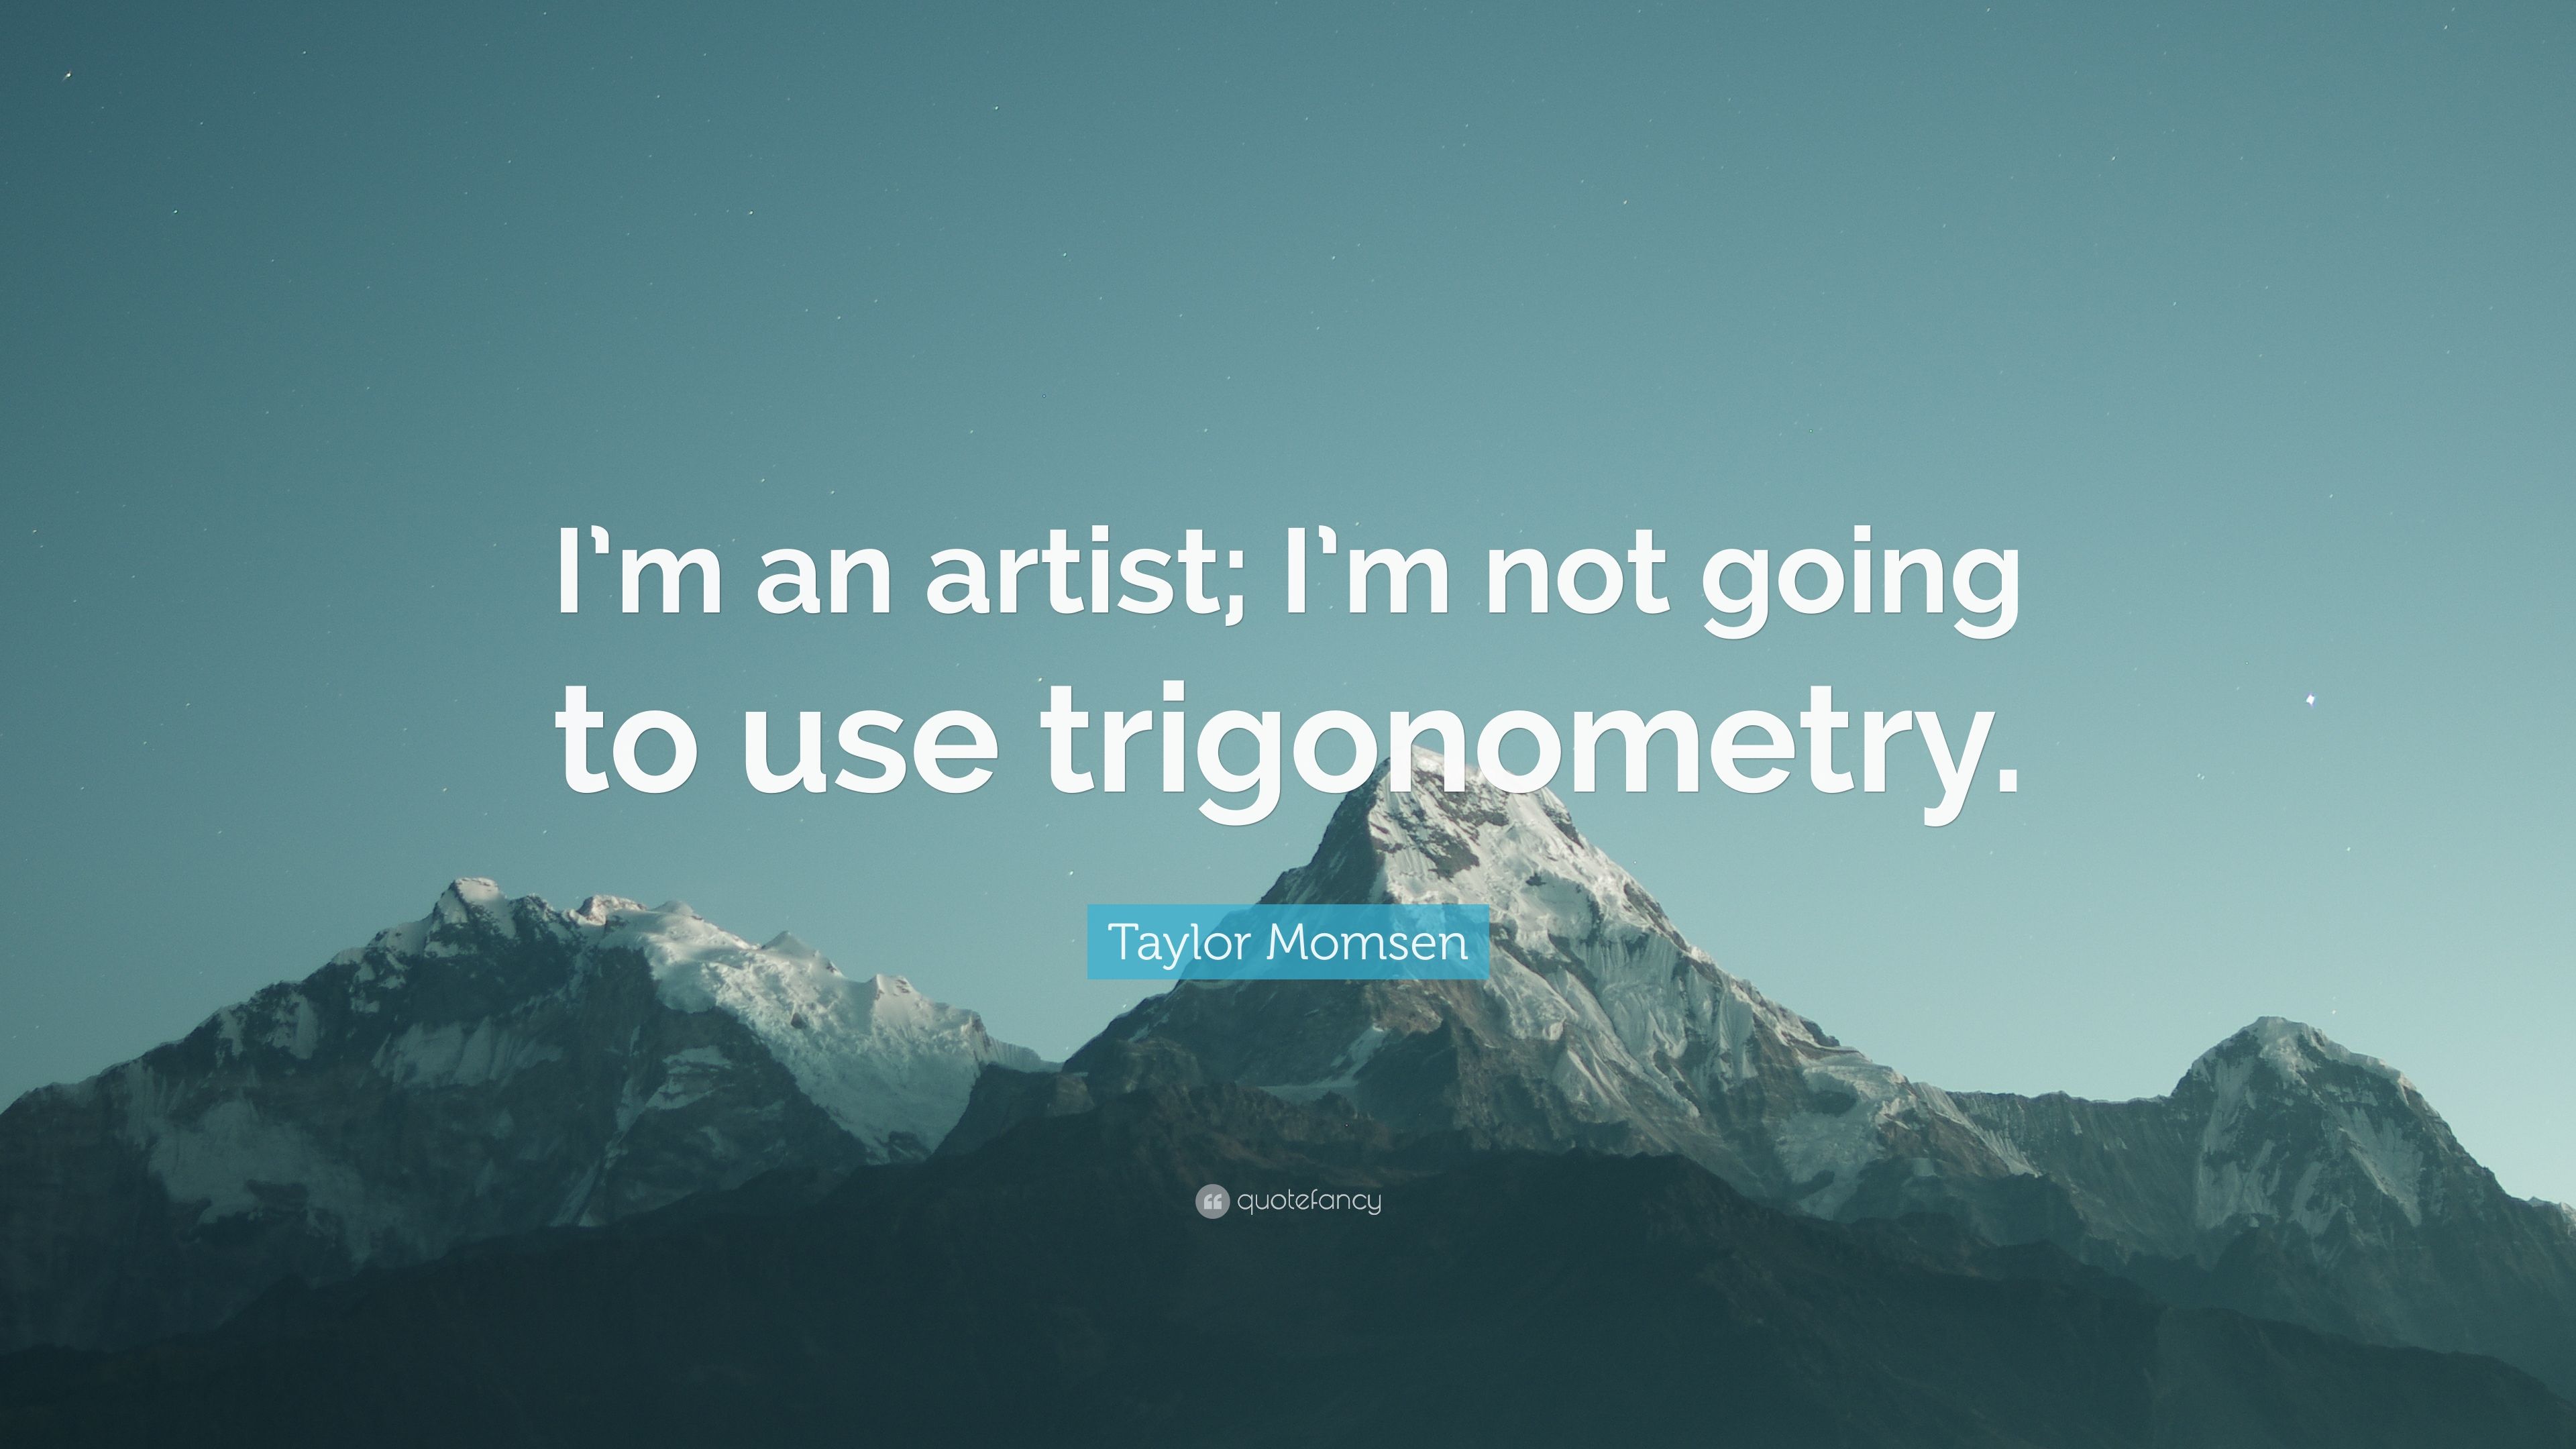 Taylor Momsen Quote: “I'm an artist; I'm not going to use trigonometry.” (7 wallpaper)